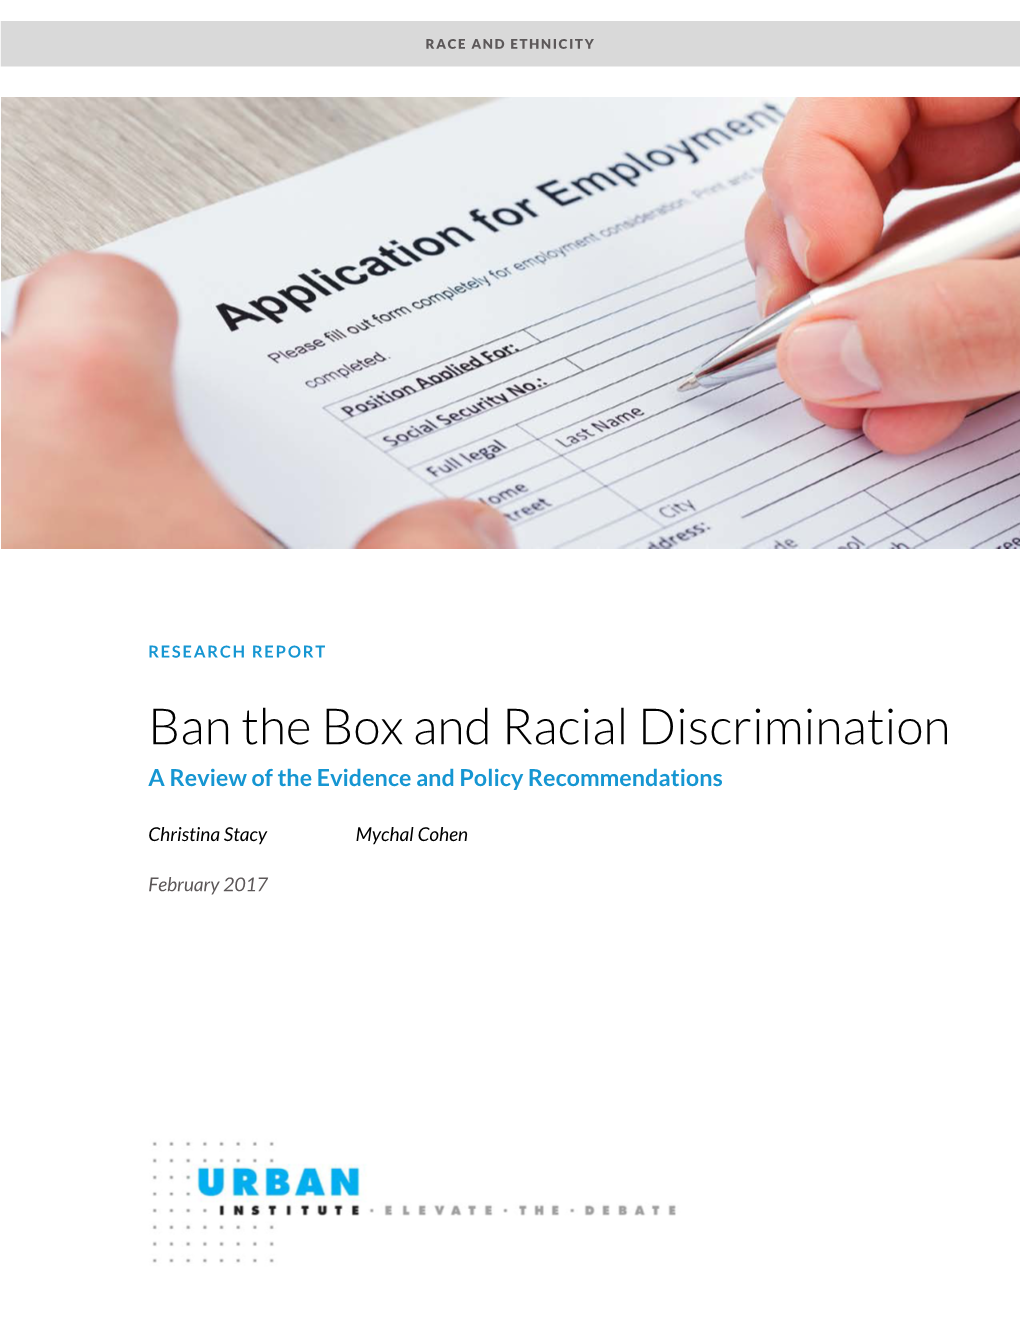 Ban the Box and Racial Discrimination a Review of the Evidence and Policy Recommendations